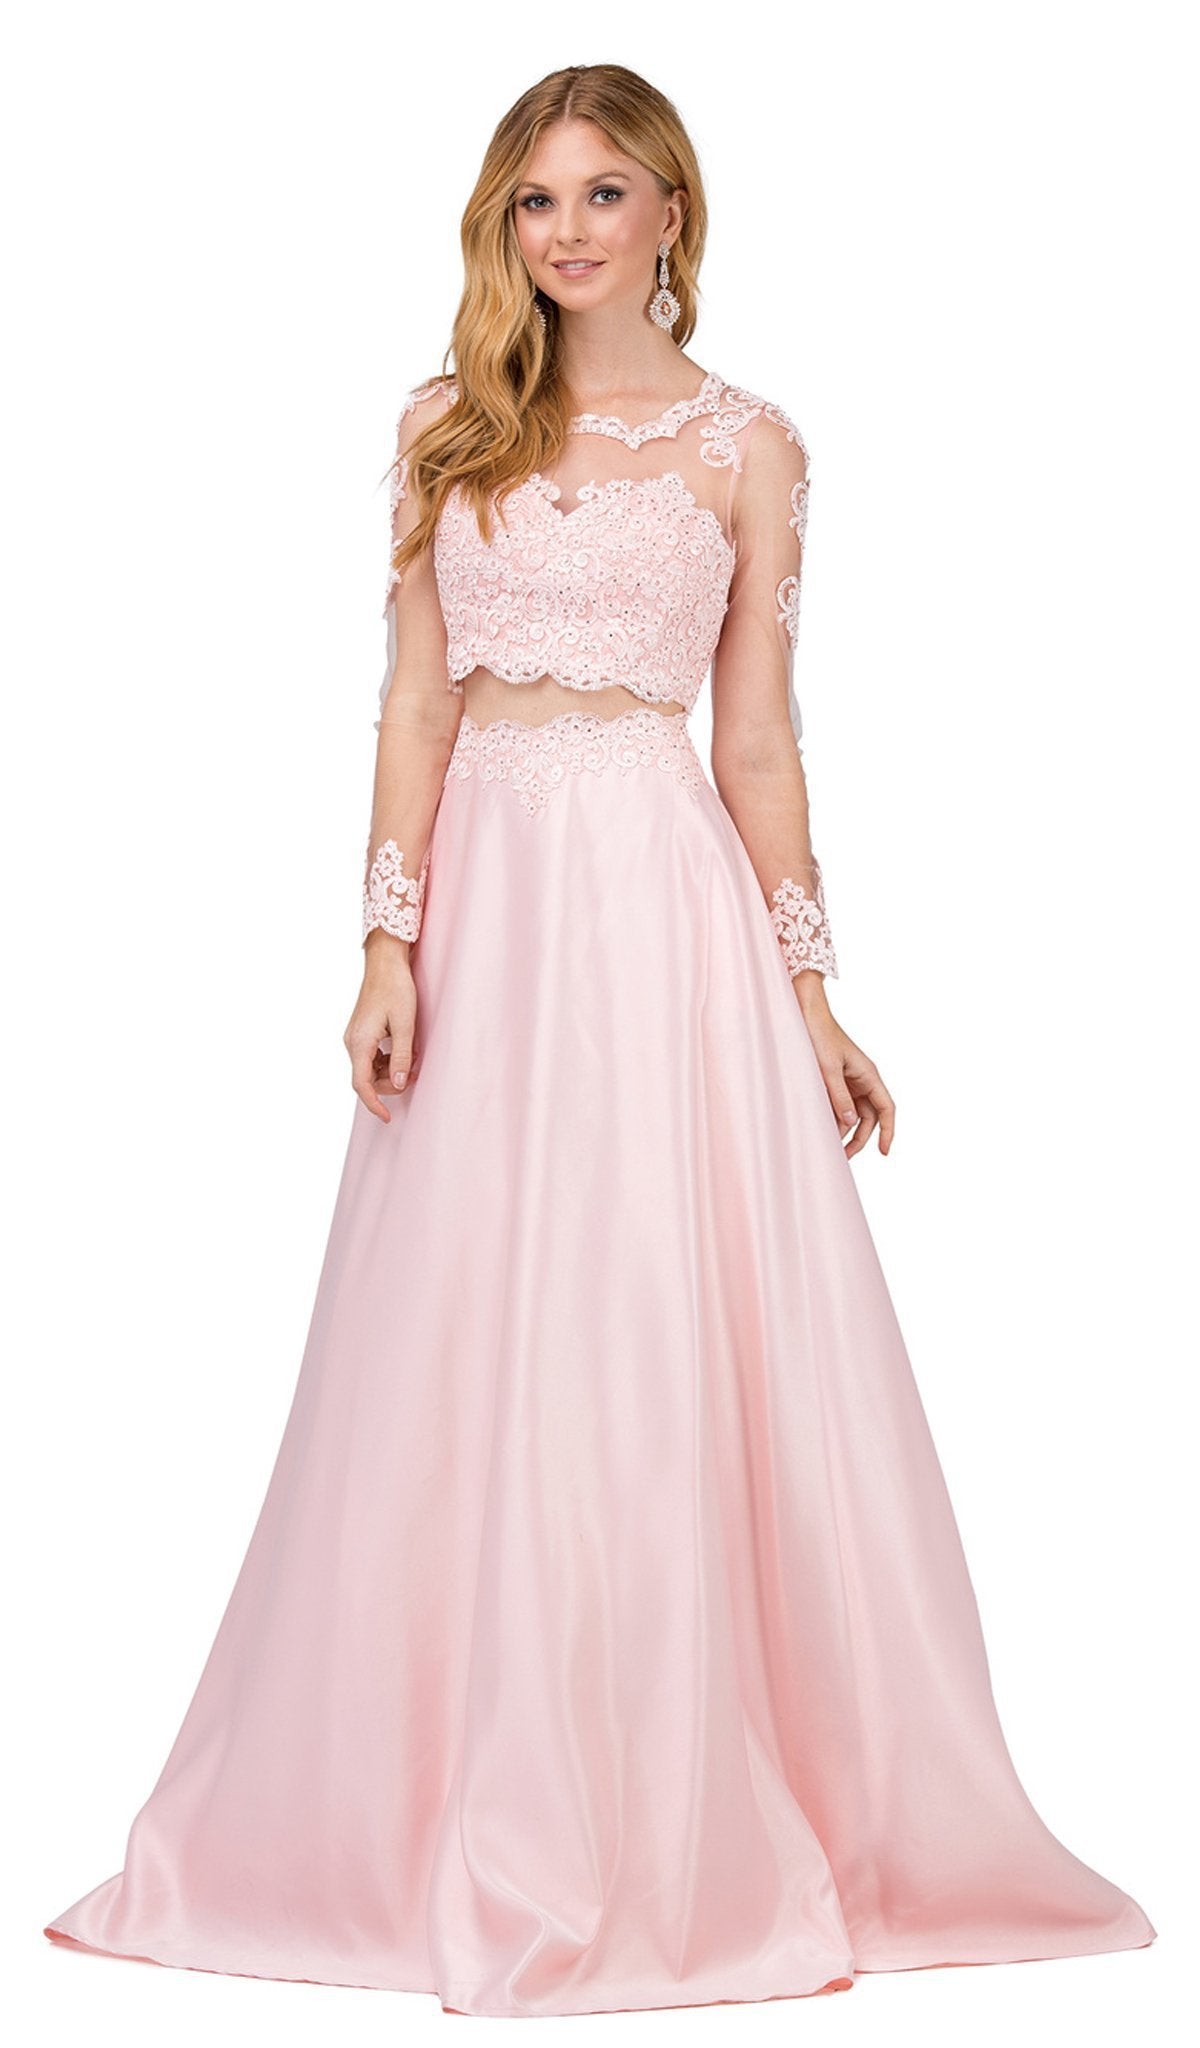 Image of Dancing Queen - 9950 Two Piece Embellished A-line Prom Dress